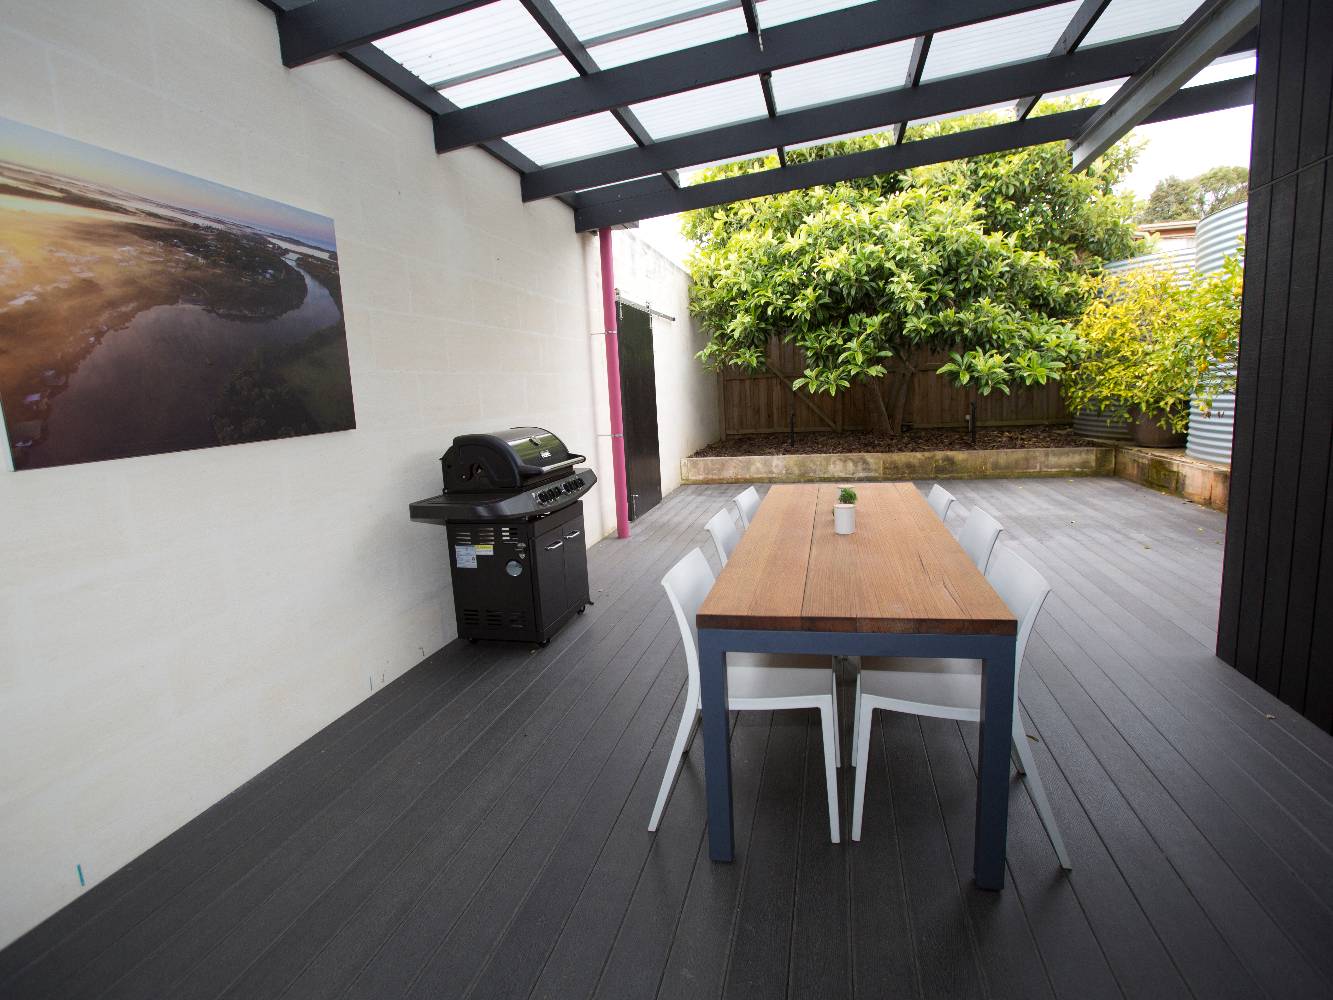 Rear deck, sheltered from wind, BBQ, Japanese bath house, great entertaining area.